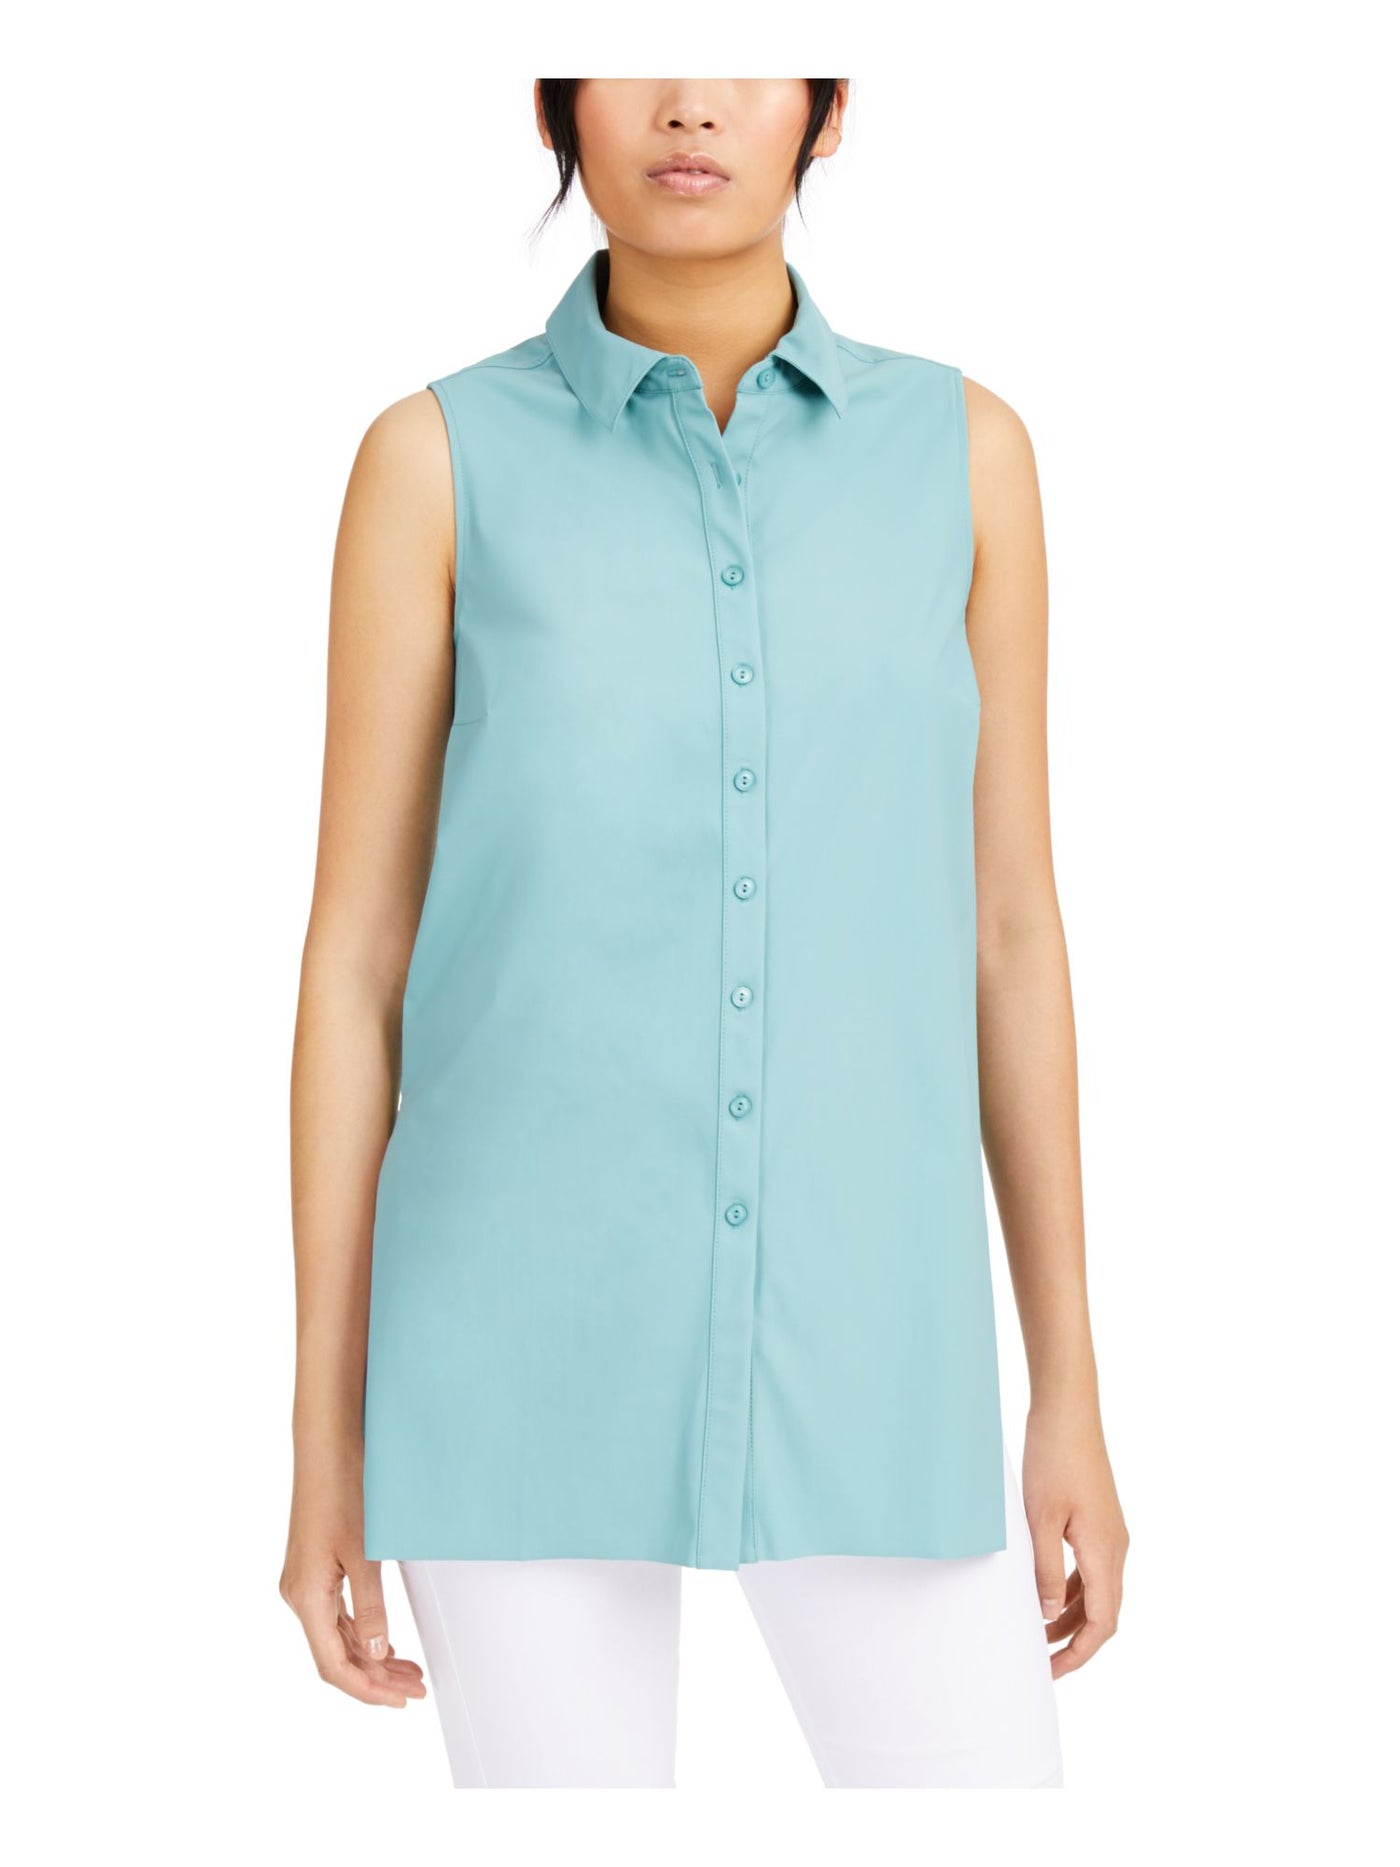 ALFANI Womens Turquoise Sleeveless Collared Button Up Top Size: XS